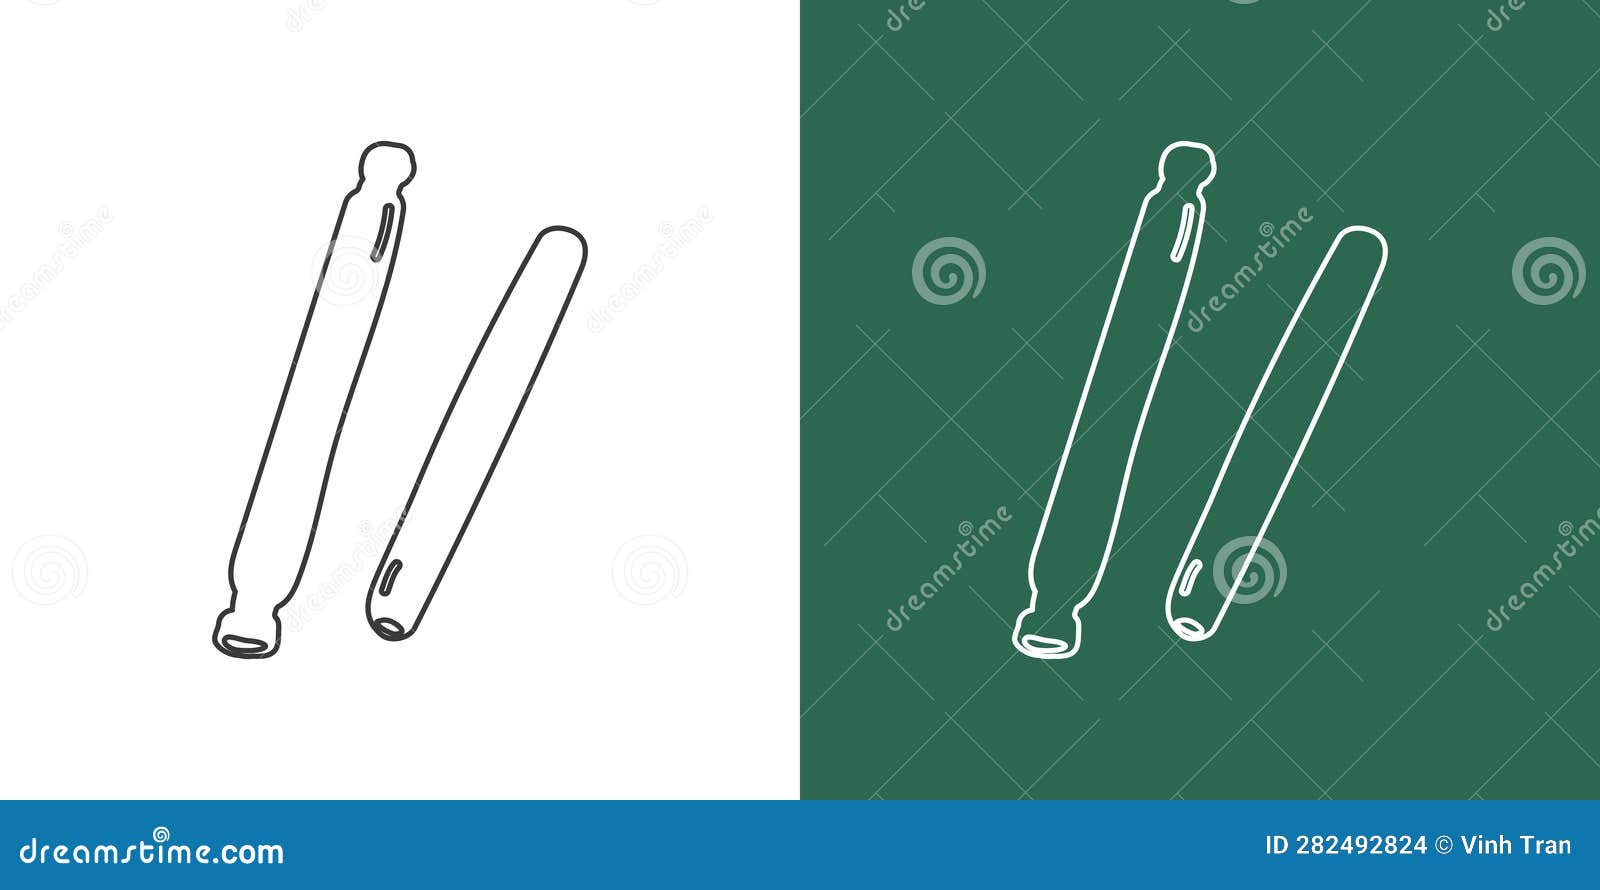 wooden claves line drawing cartoon. percussion instrument claves clipart drawing linear style on white and chalkboard background